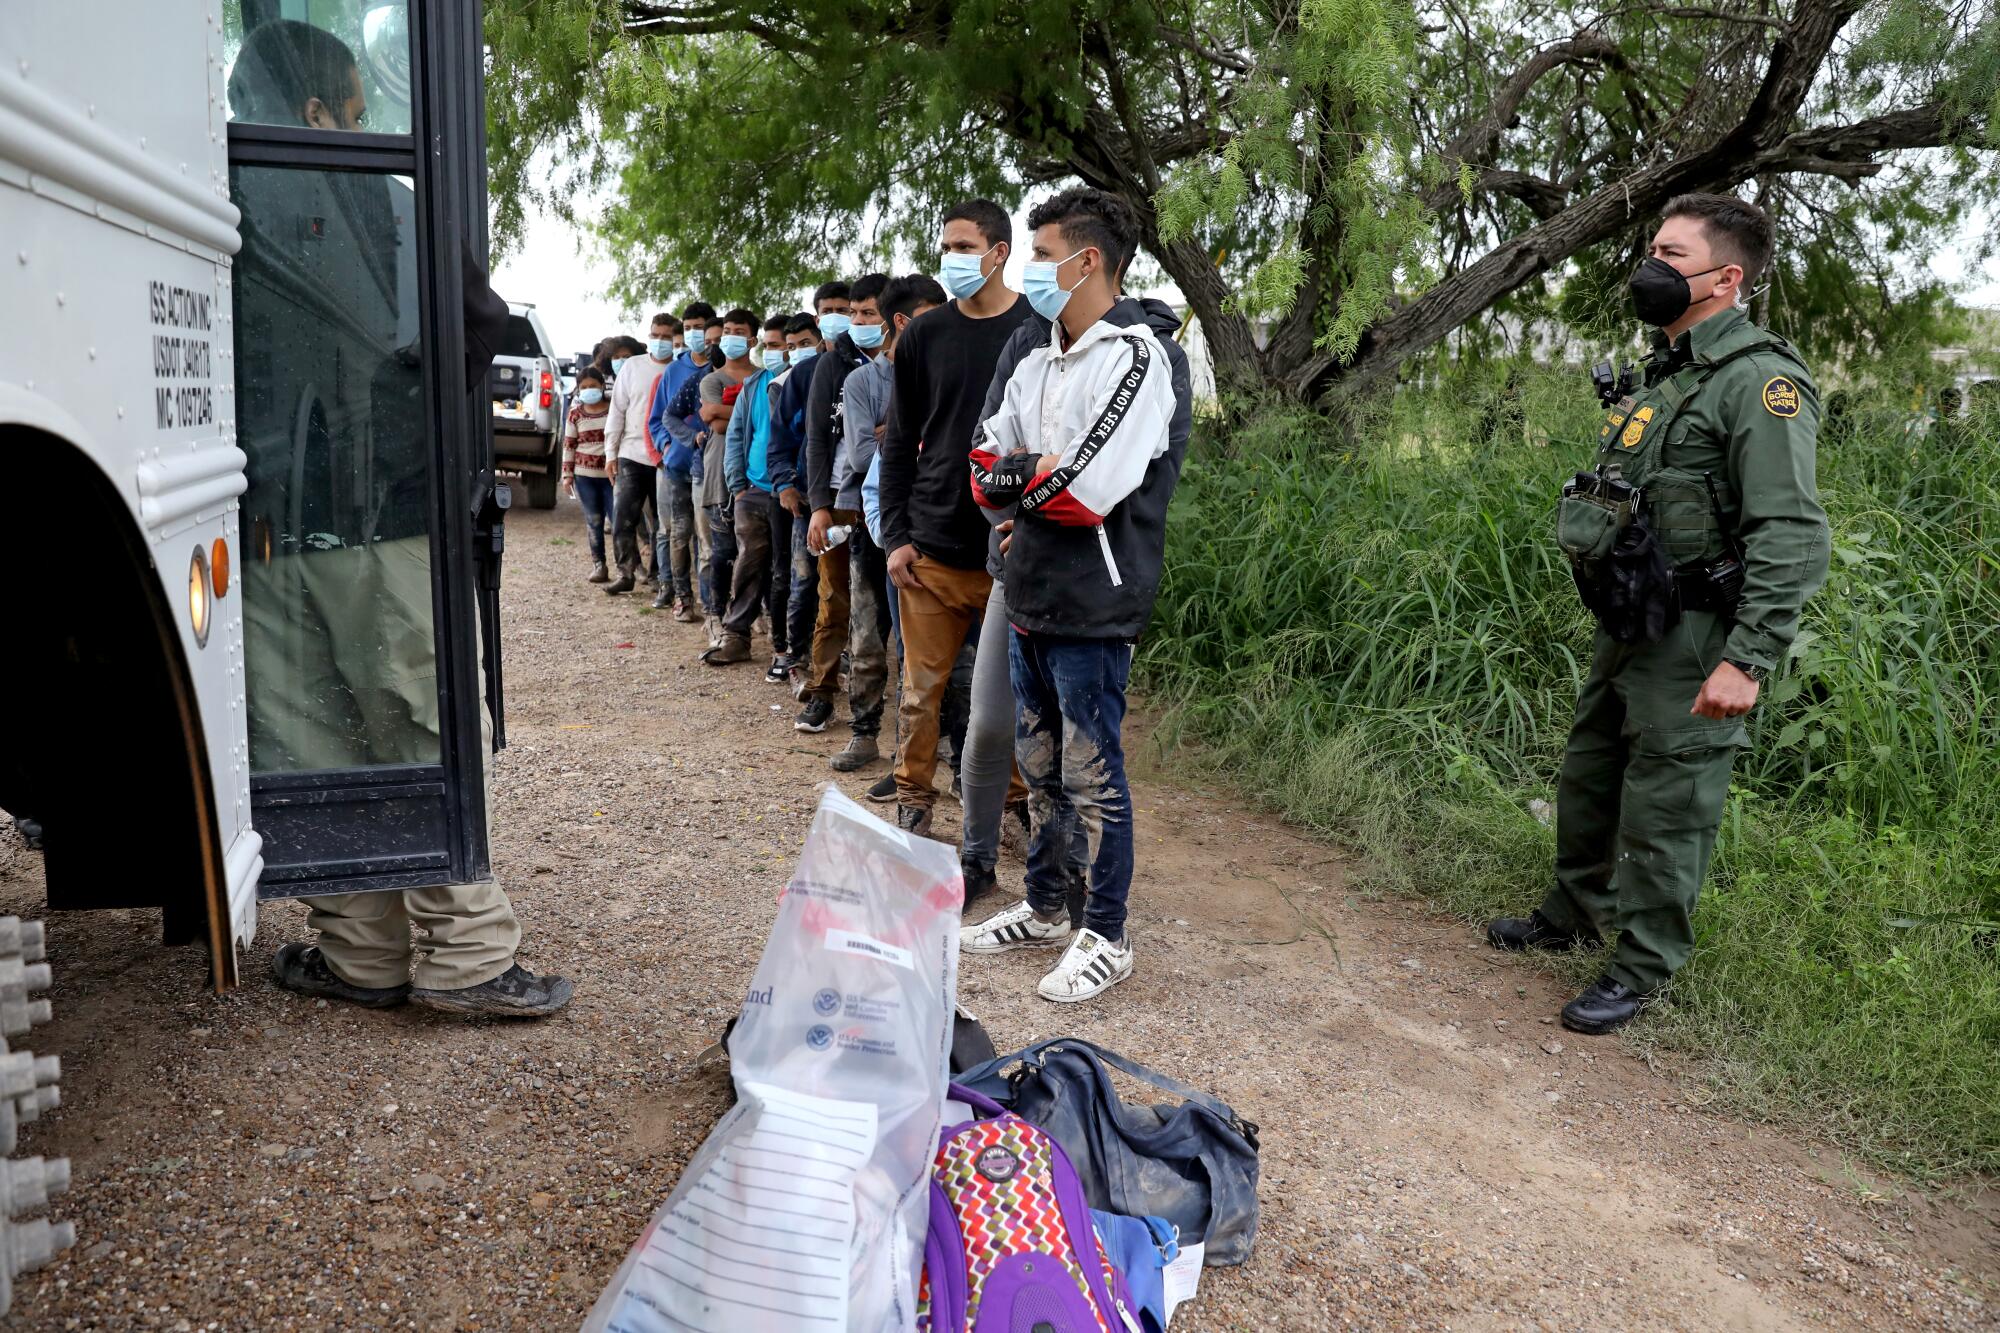 A Border Patrol agent, right, stands near a line of migrants waiting near a bus
